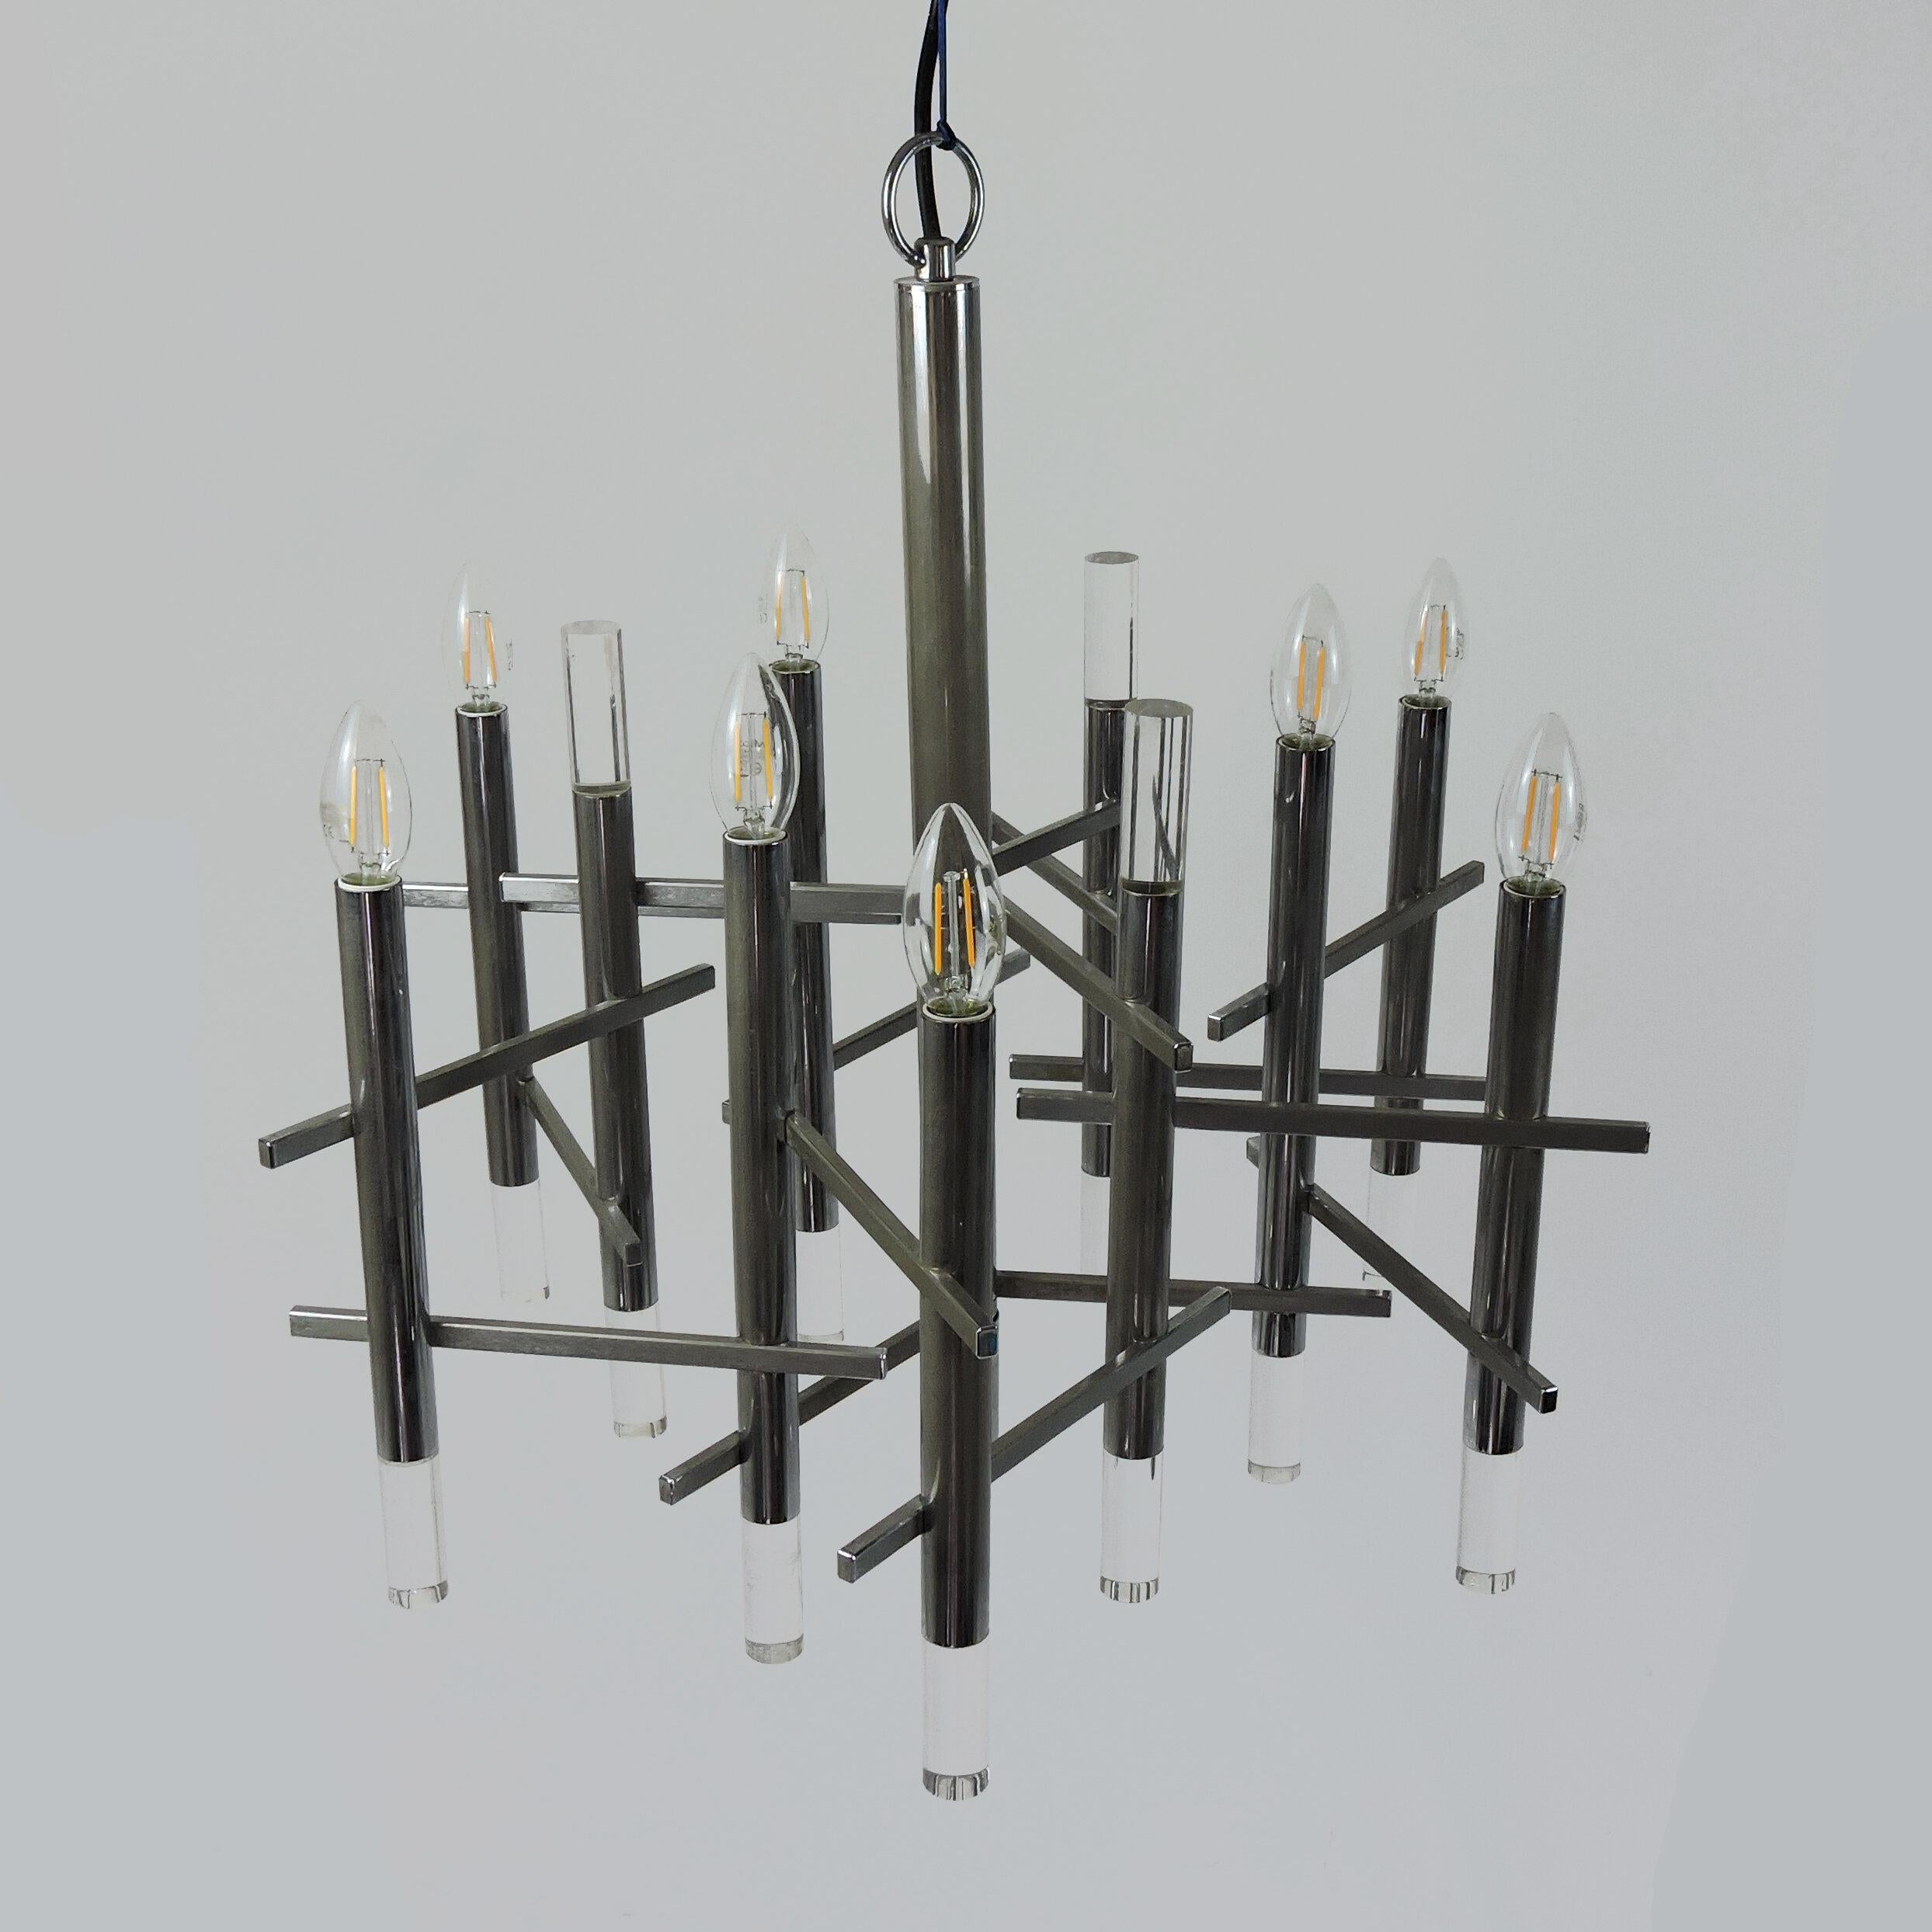 A chandelier designed by Gaetano Sciolari and produced in Italy in 1970. It is made from chromed metal, lucite cylinders.

Designer - Gaetano Sciolari

Manufacturer - Unknown

Design Period - 1970 to 1979

Country of Manufacture -